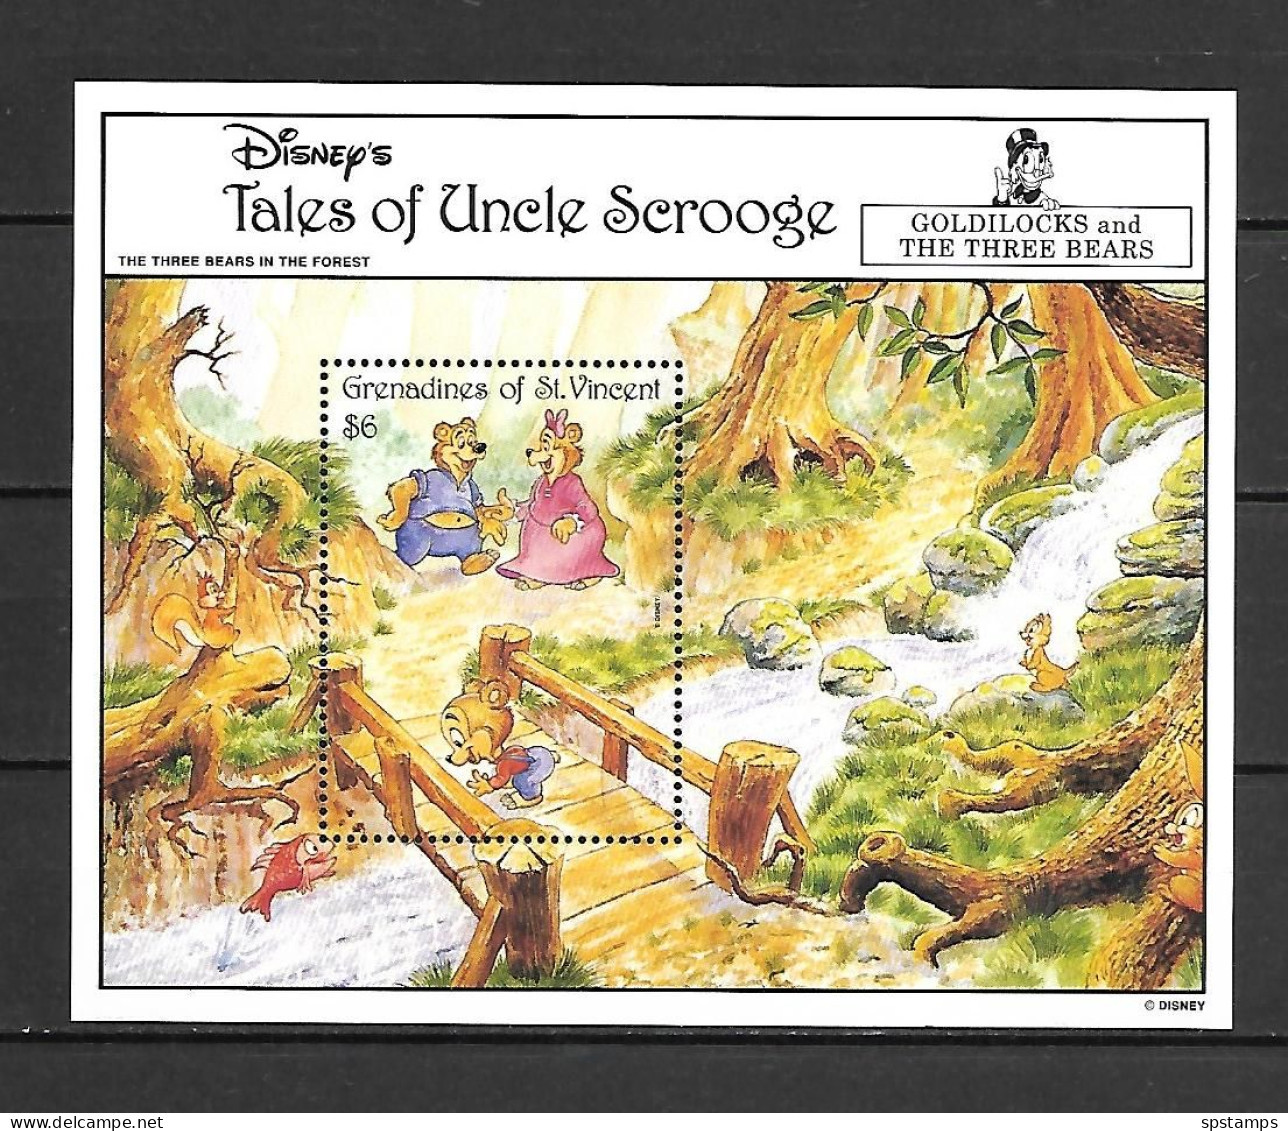 Disney St Vincent Gr 1992 Tales Of Ungle Scrooge - Goldilocks And The And Three Bears MS #1 MNH - Disney